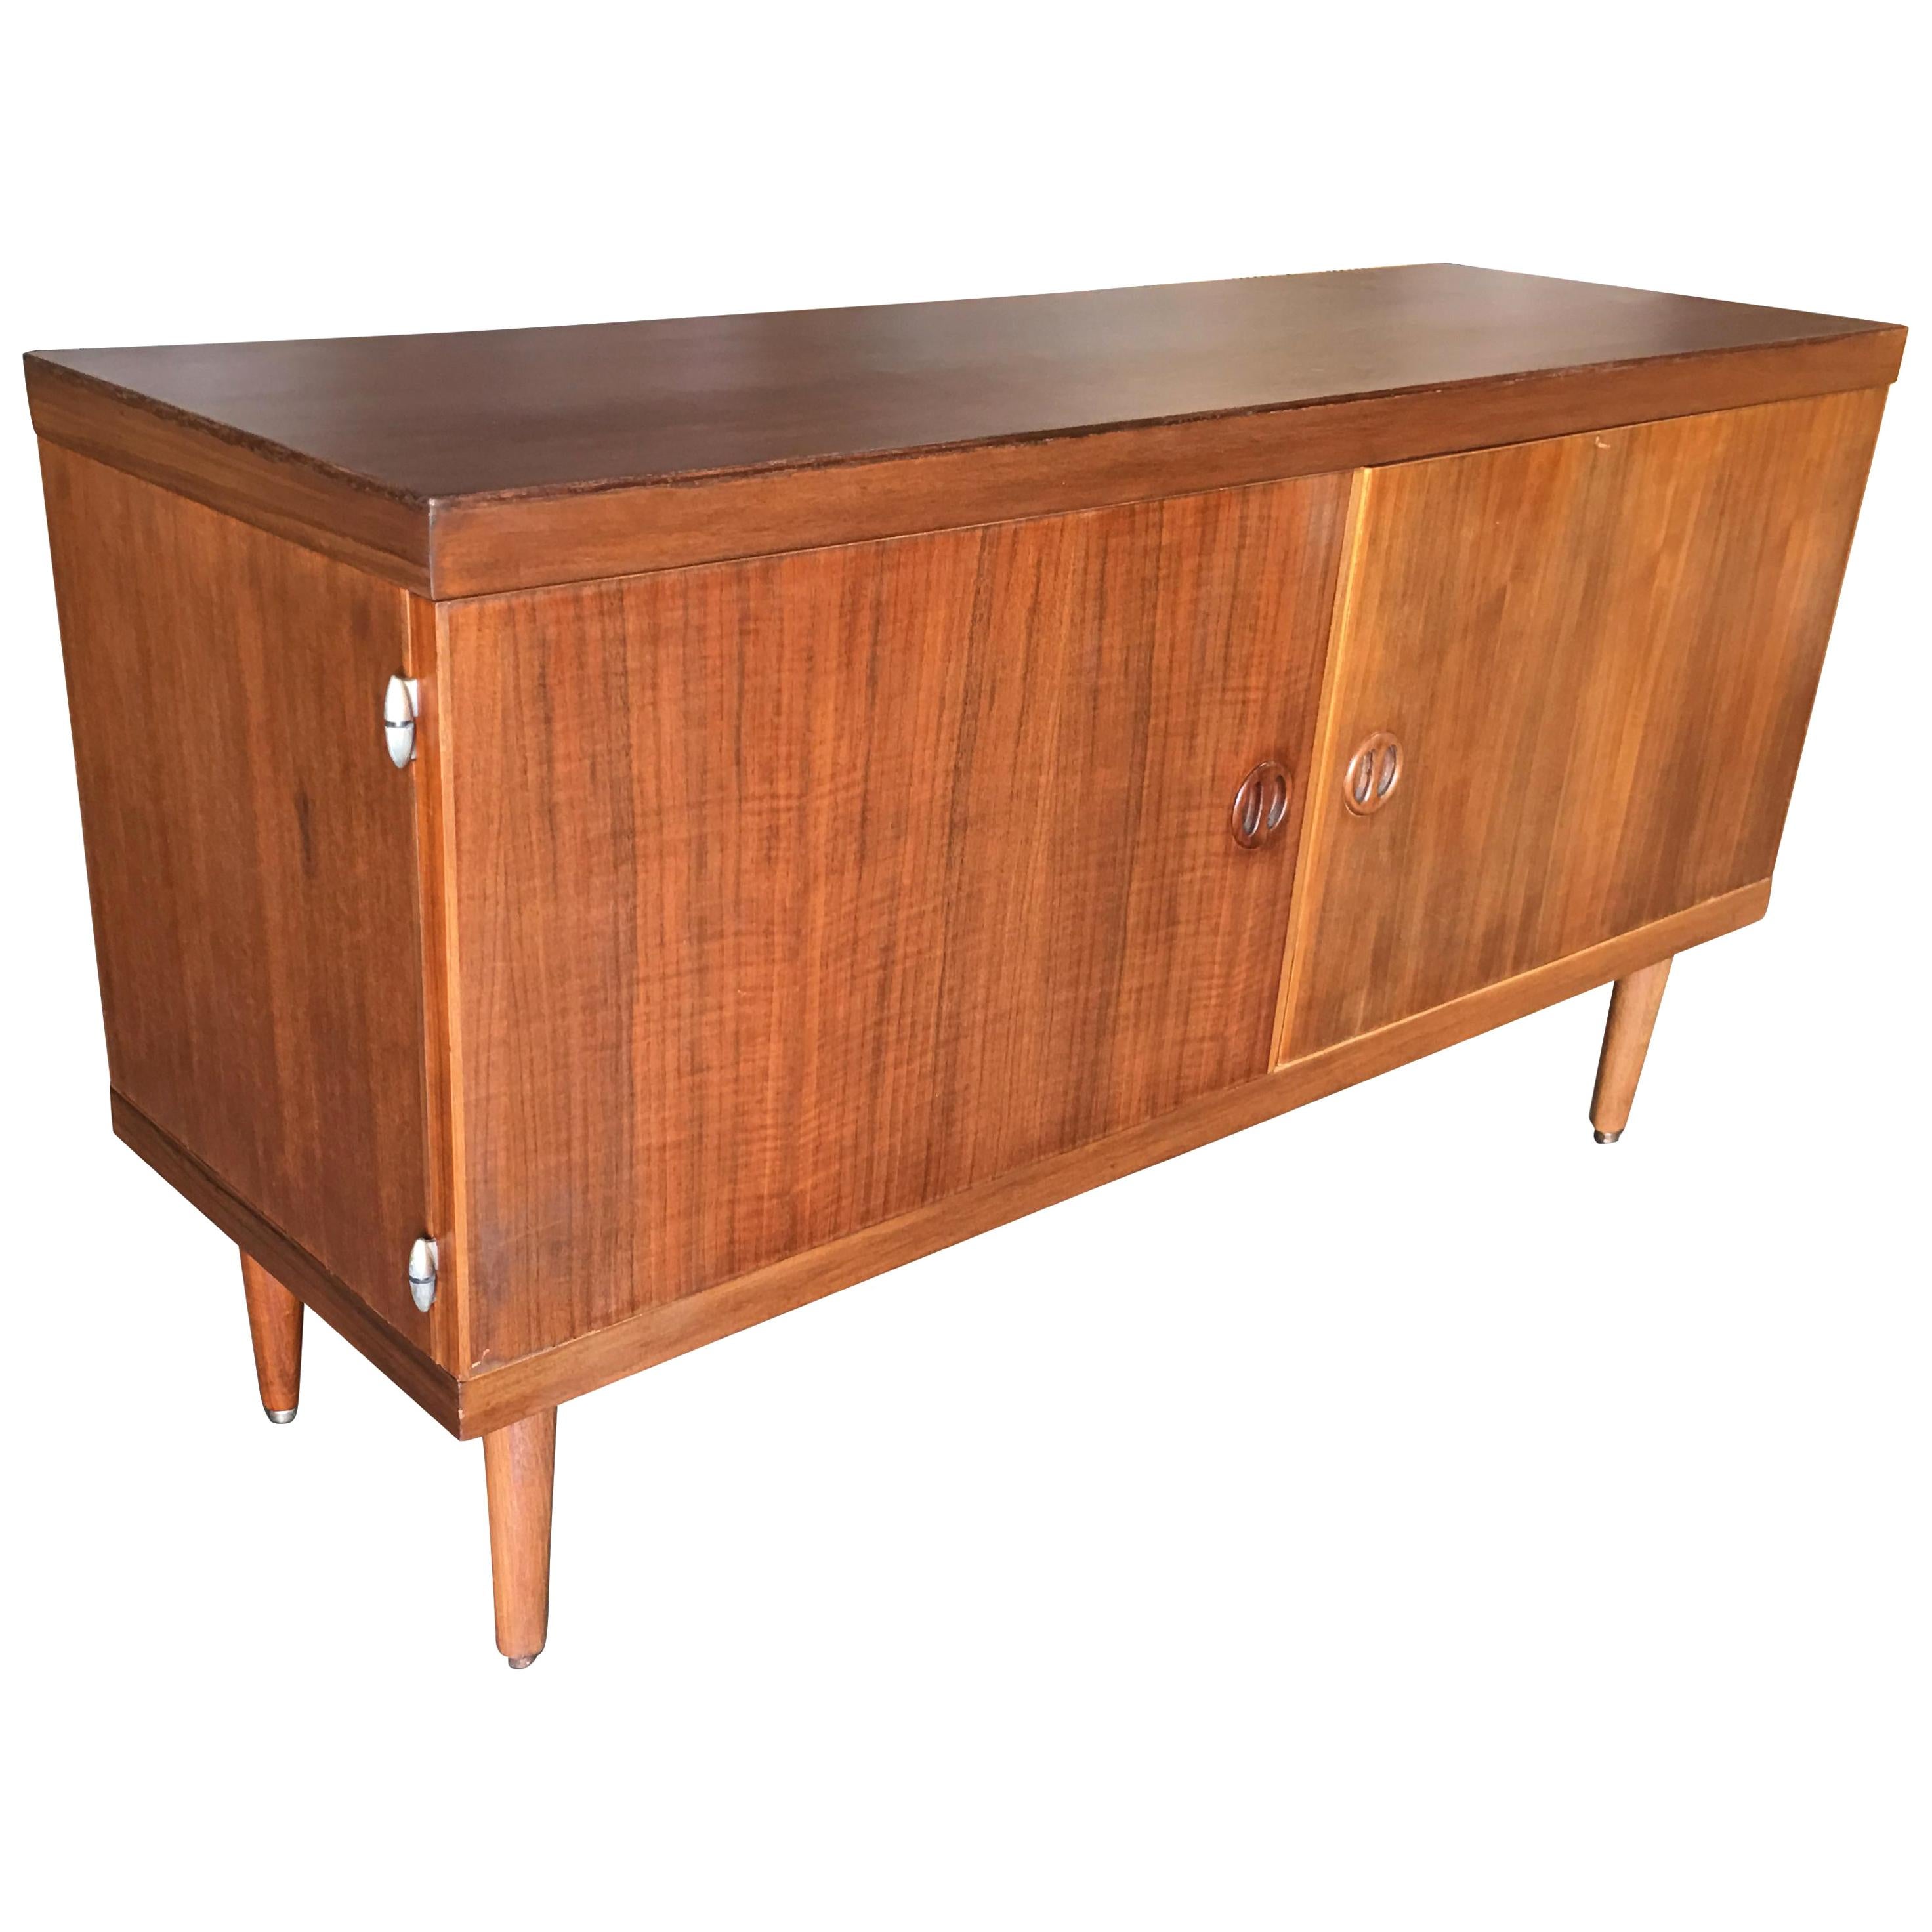 Danish Modern Credenza Cabinet with Fancy Hinges and Sculpted Pig Nose Pulls